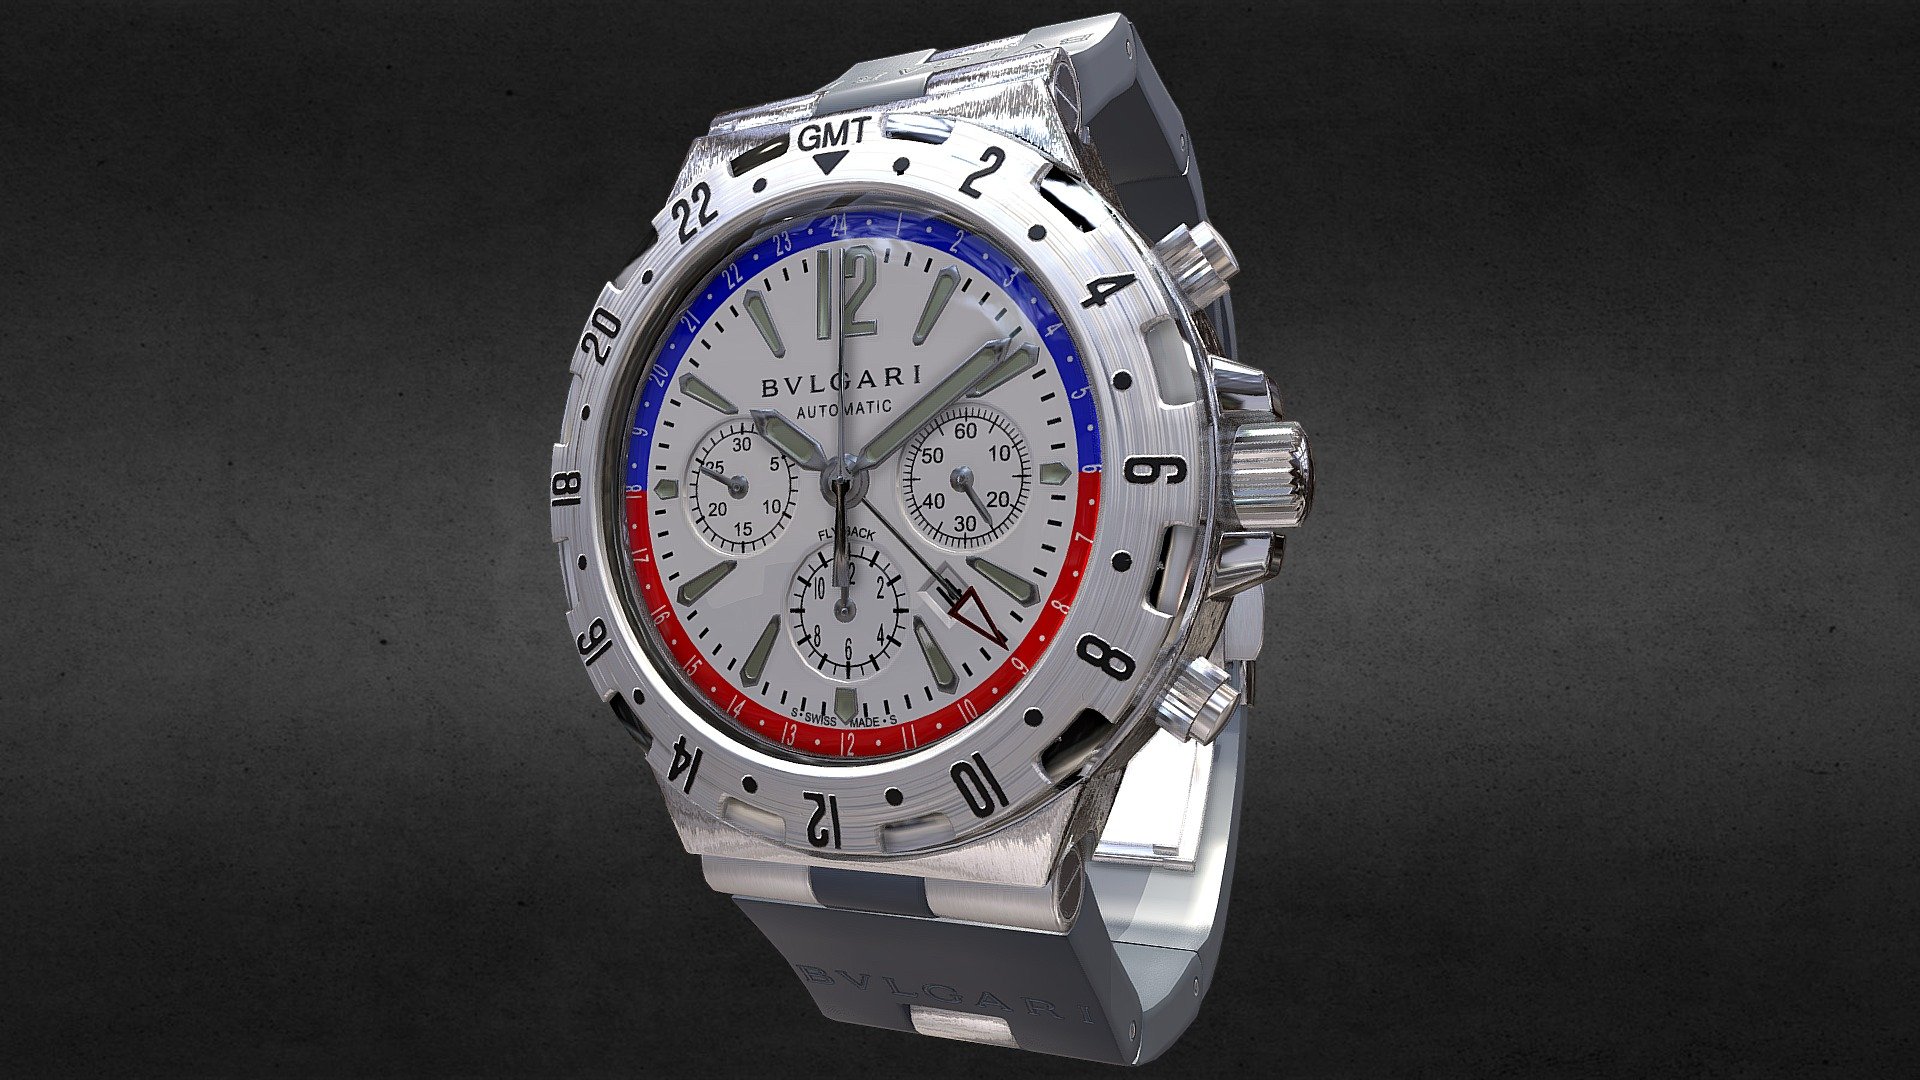 Awesome stainless steel Bvlgari Diagono GMT 40 S FB Watch․
Use for Unreal Engine 4 and Unity3D. Try in augmented reality in the AR-Watches app. 
Links to the app: Android, iOS

Currently available for download in FBX format.

3D model developed by AR-Watches

Disclaimer: We do not own the design of the watch, we only made the 3D model 3d model